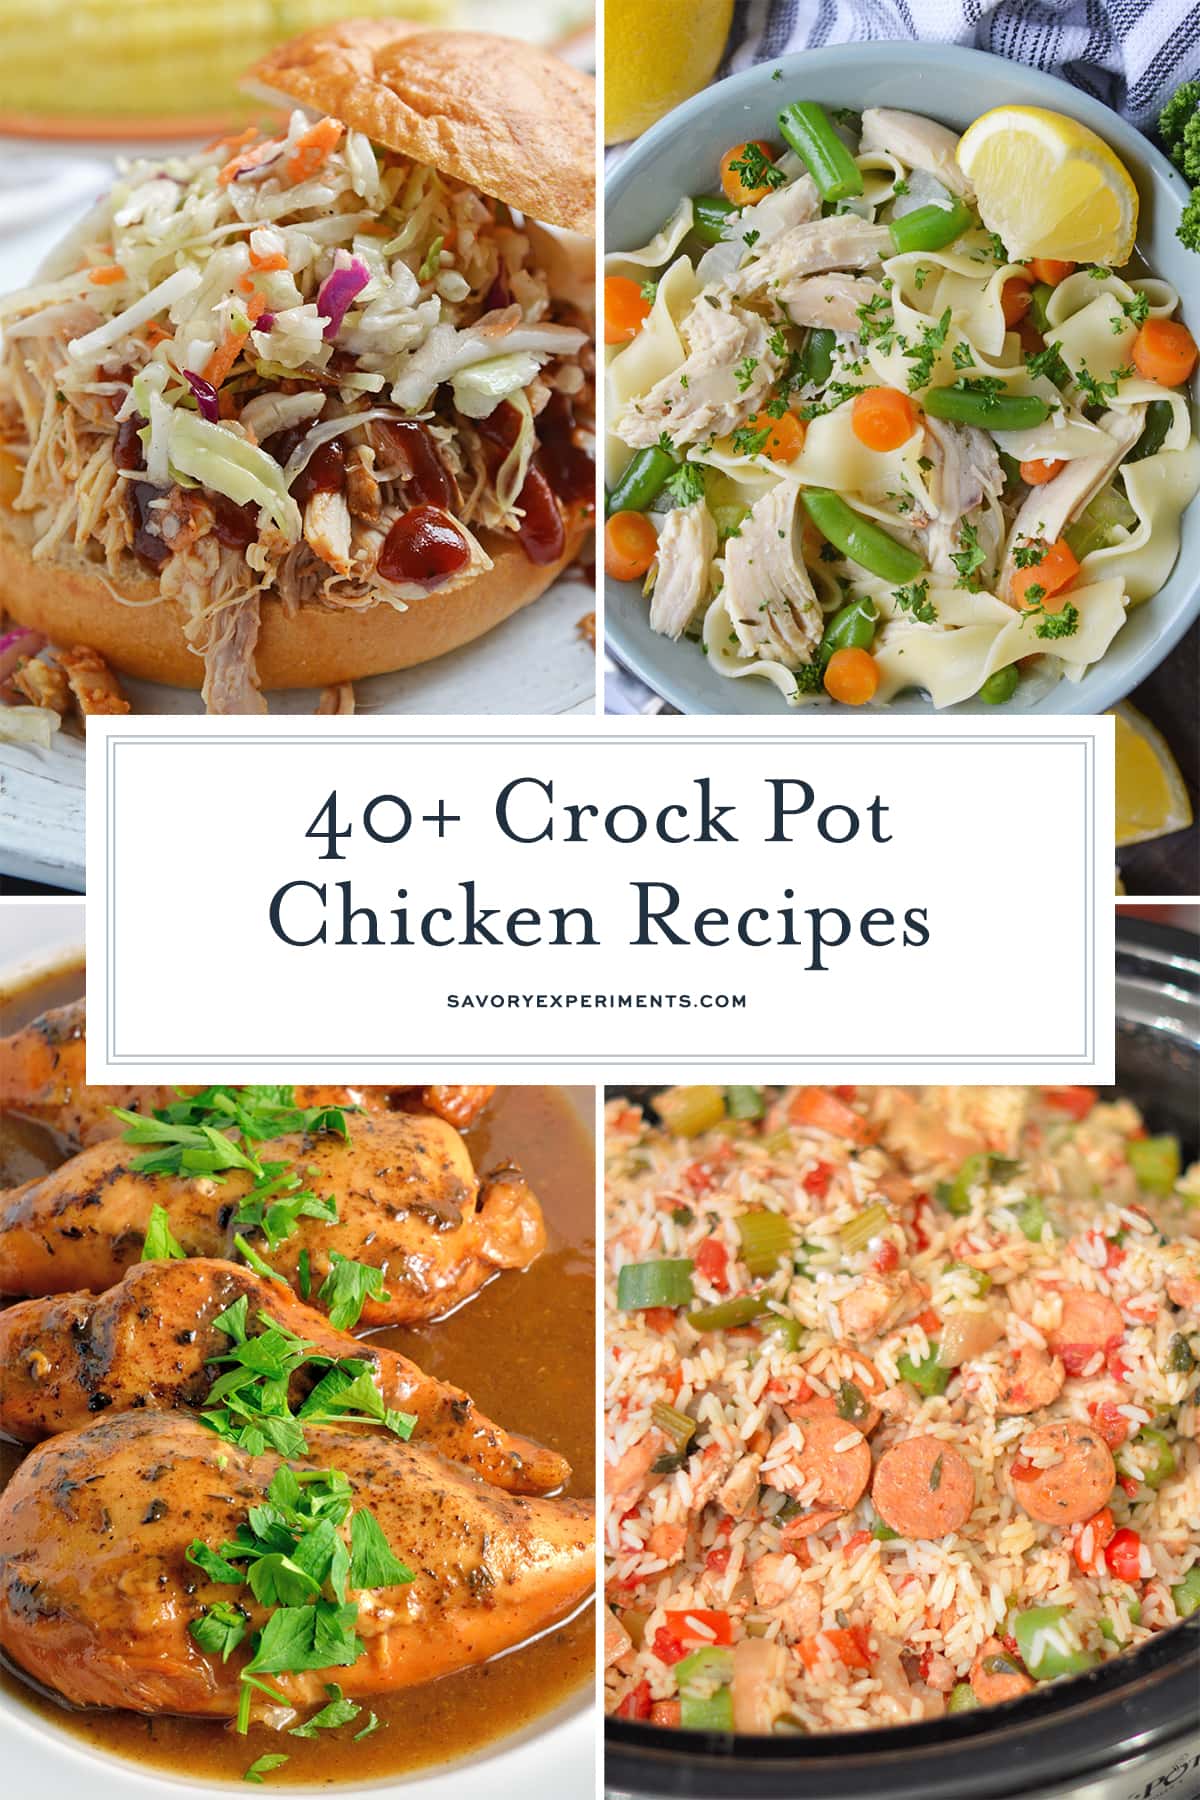 25 Slow-Cooker Chicken Recipes, Easy Crock Pot® Chicken Ideas, Classic  Comfort Food Recipes : Food Network